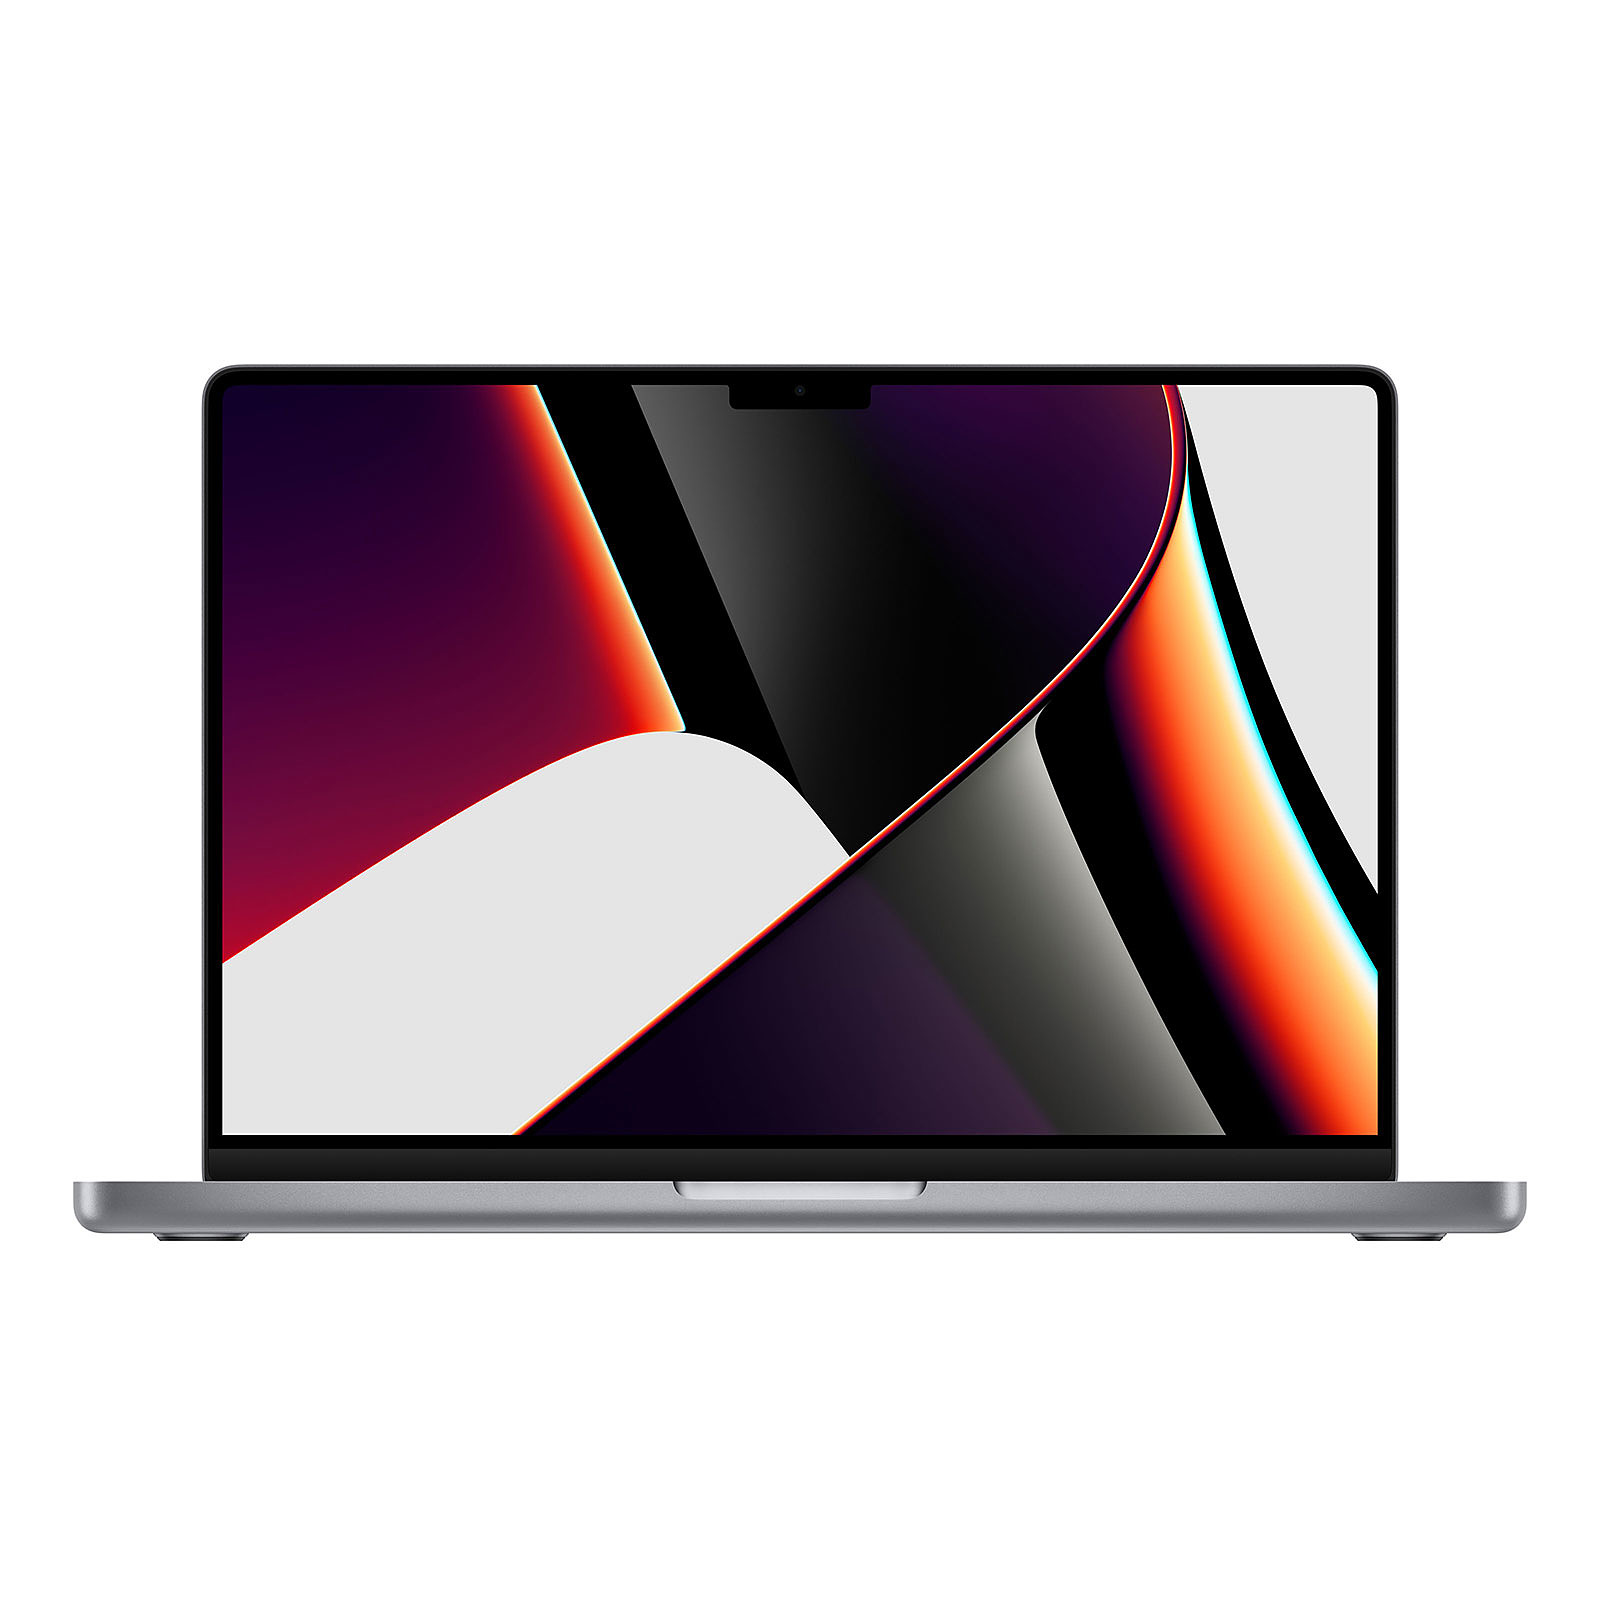 Apple MacBook Pro M1 Max (2021) 14" Gris sideral 64Go/1To (MKGQ3FN/A-M1-MAX-64GB) - MacBook Apple